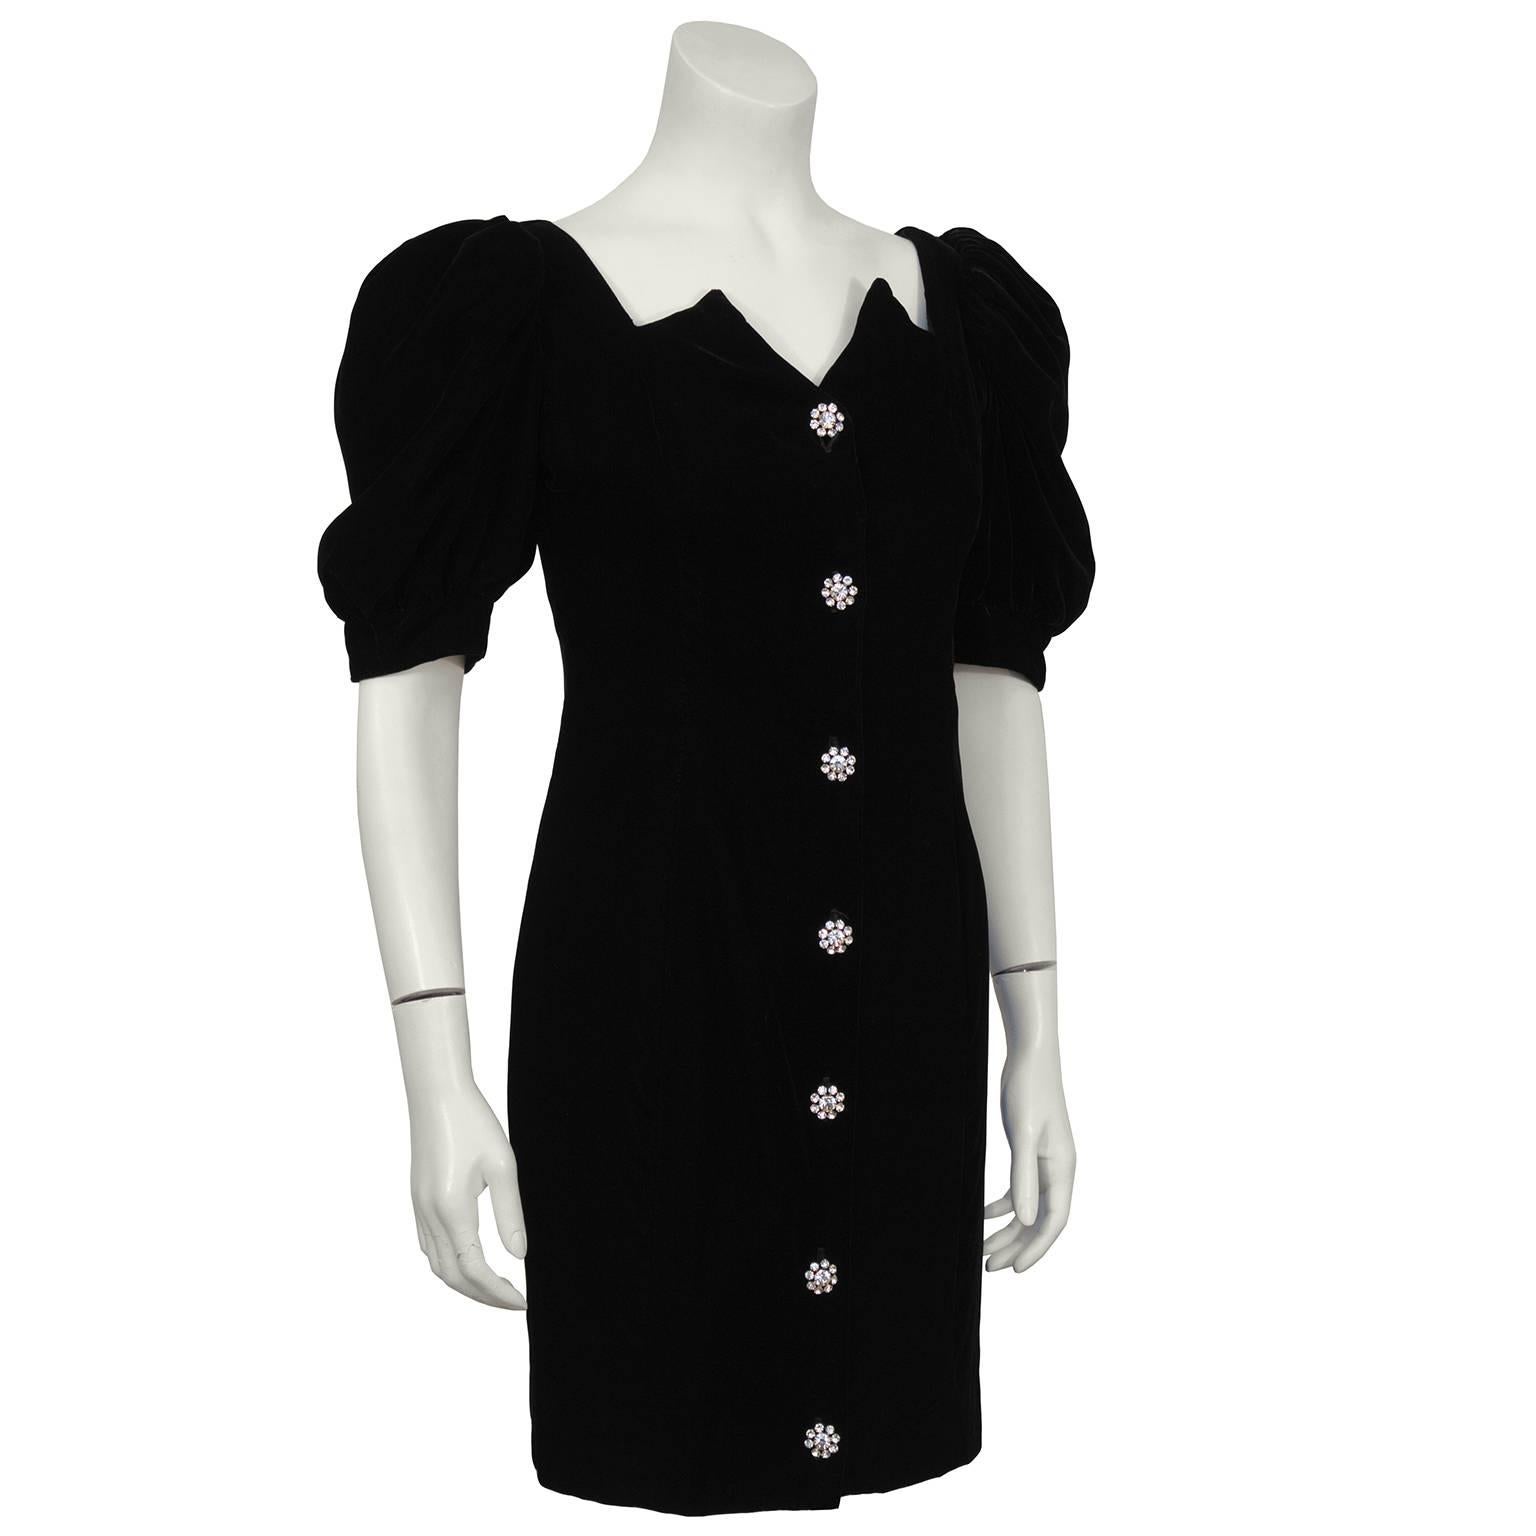 Black velvet cocktail mini dress by Lillie Rubin from the 1980's. The dress has an architectural sweetheart neckline and short puffed sleeves. Large rhinestone buttons fasten up the front with hidden small black snaps for added coverage. Matching